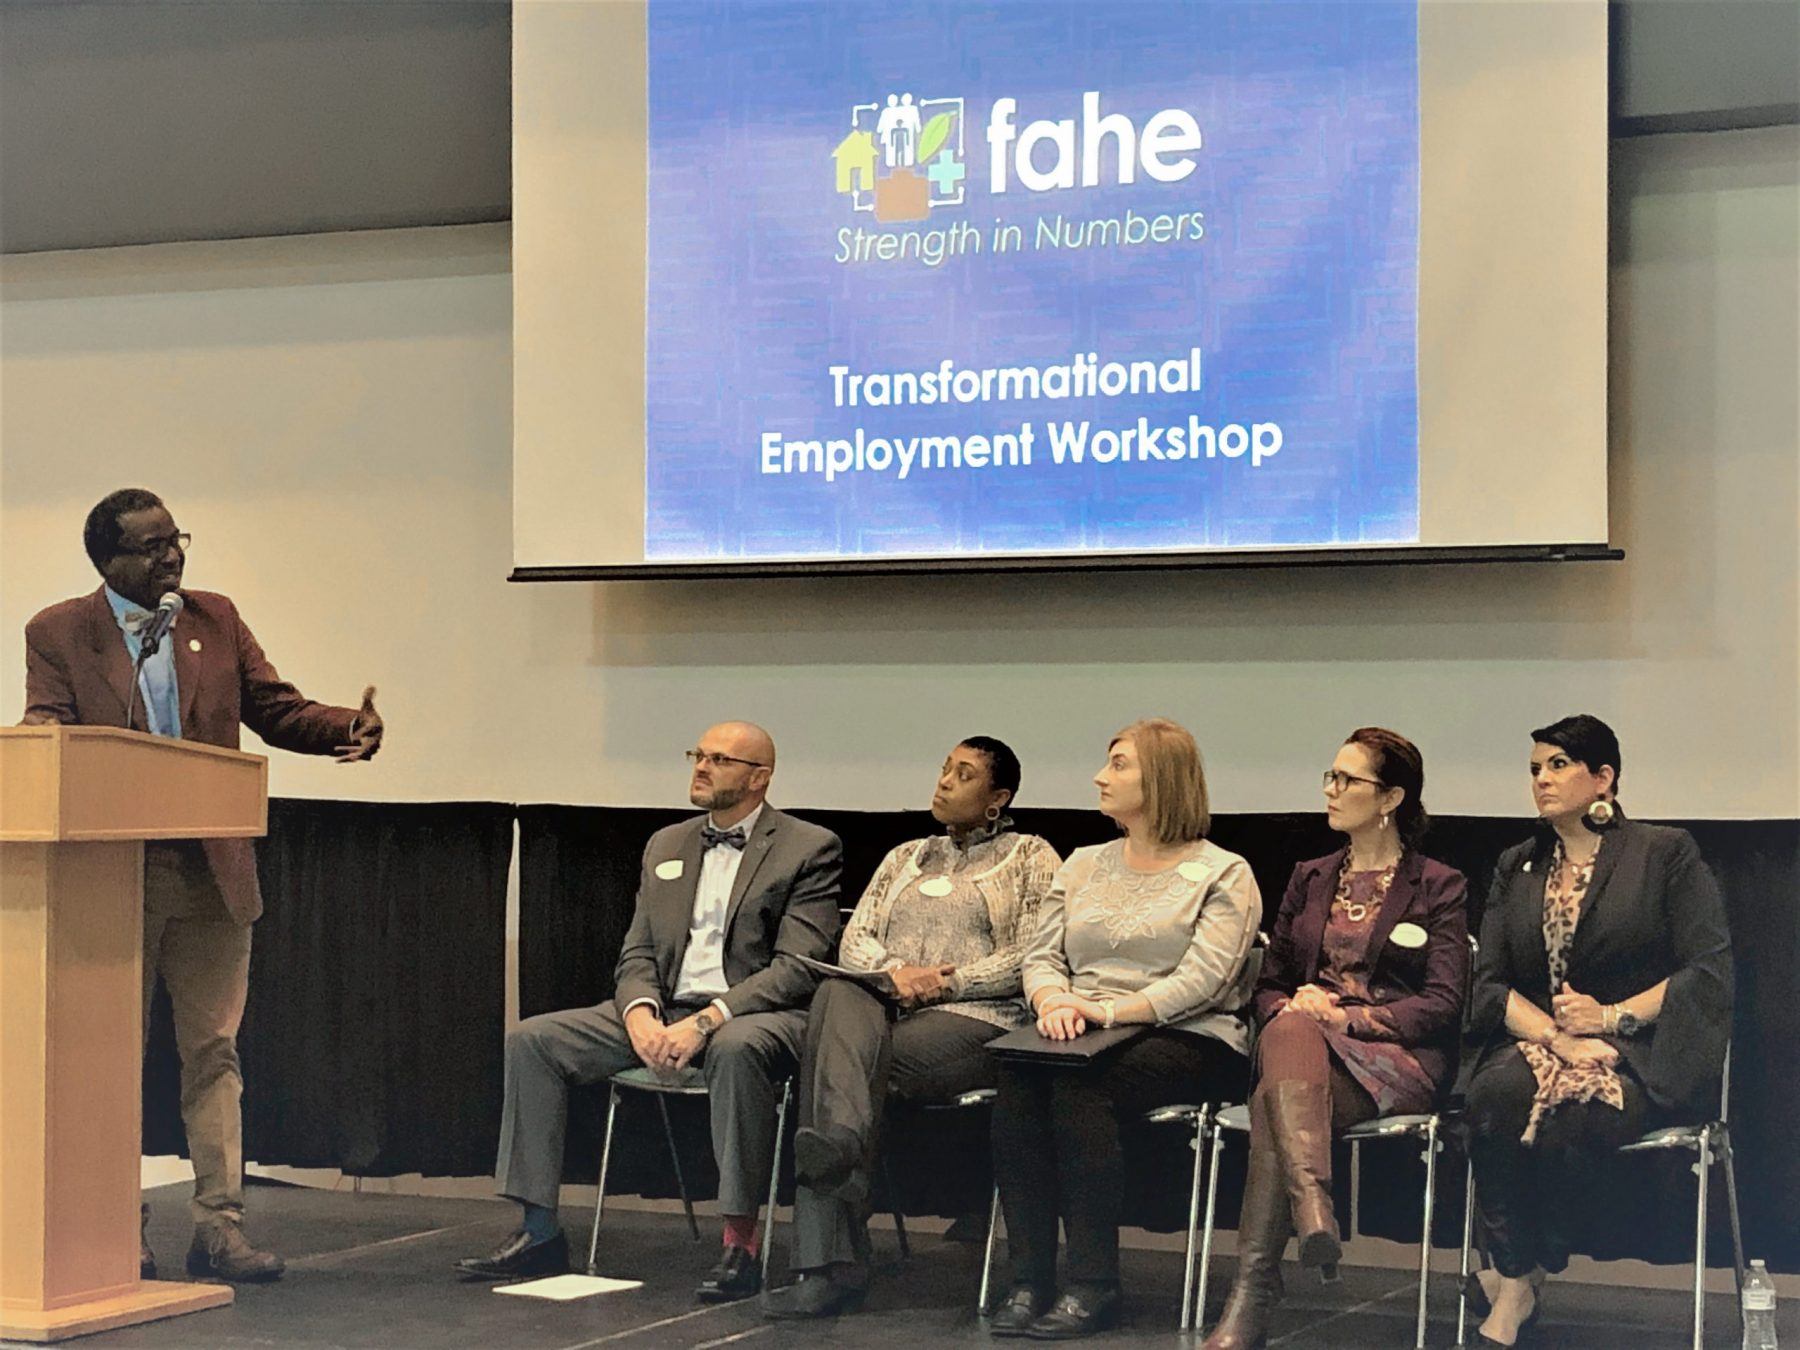 A group of five people are seated listening to a presenter speak at a podium. That is a Transformational Employment Workshop presentation screen behind them.